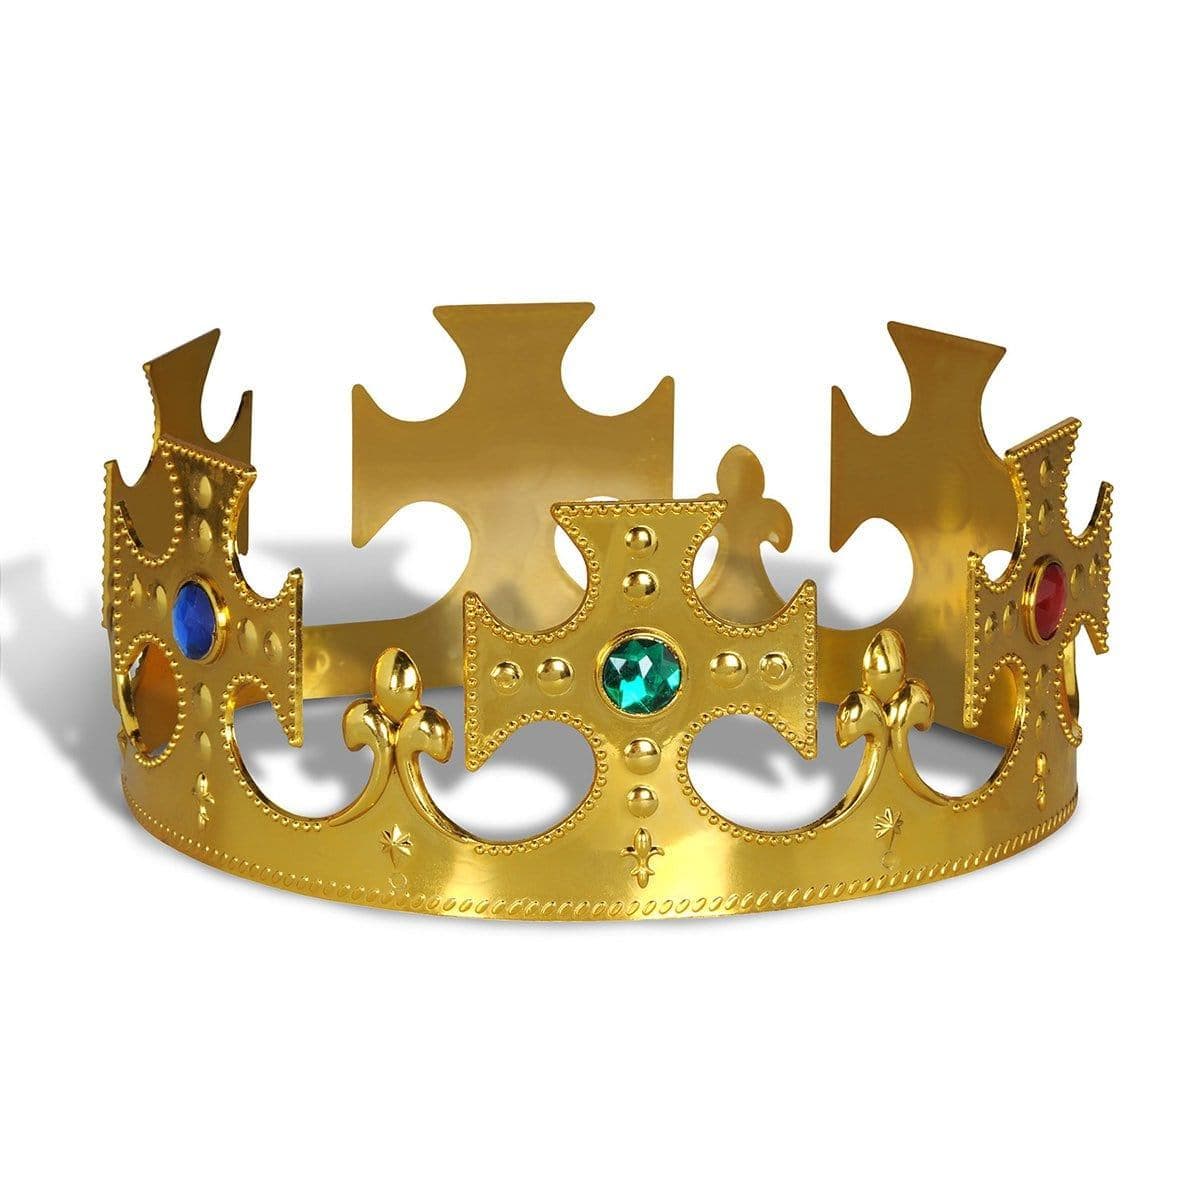 Buy Costume Accessories Gold jeweled king's crown for adults sold at Party Expert